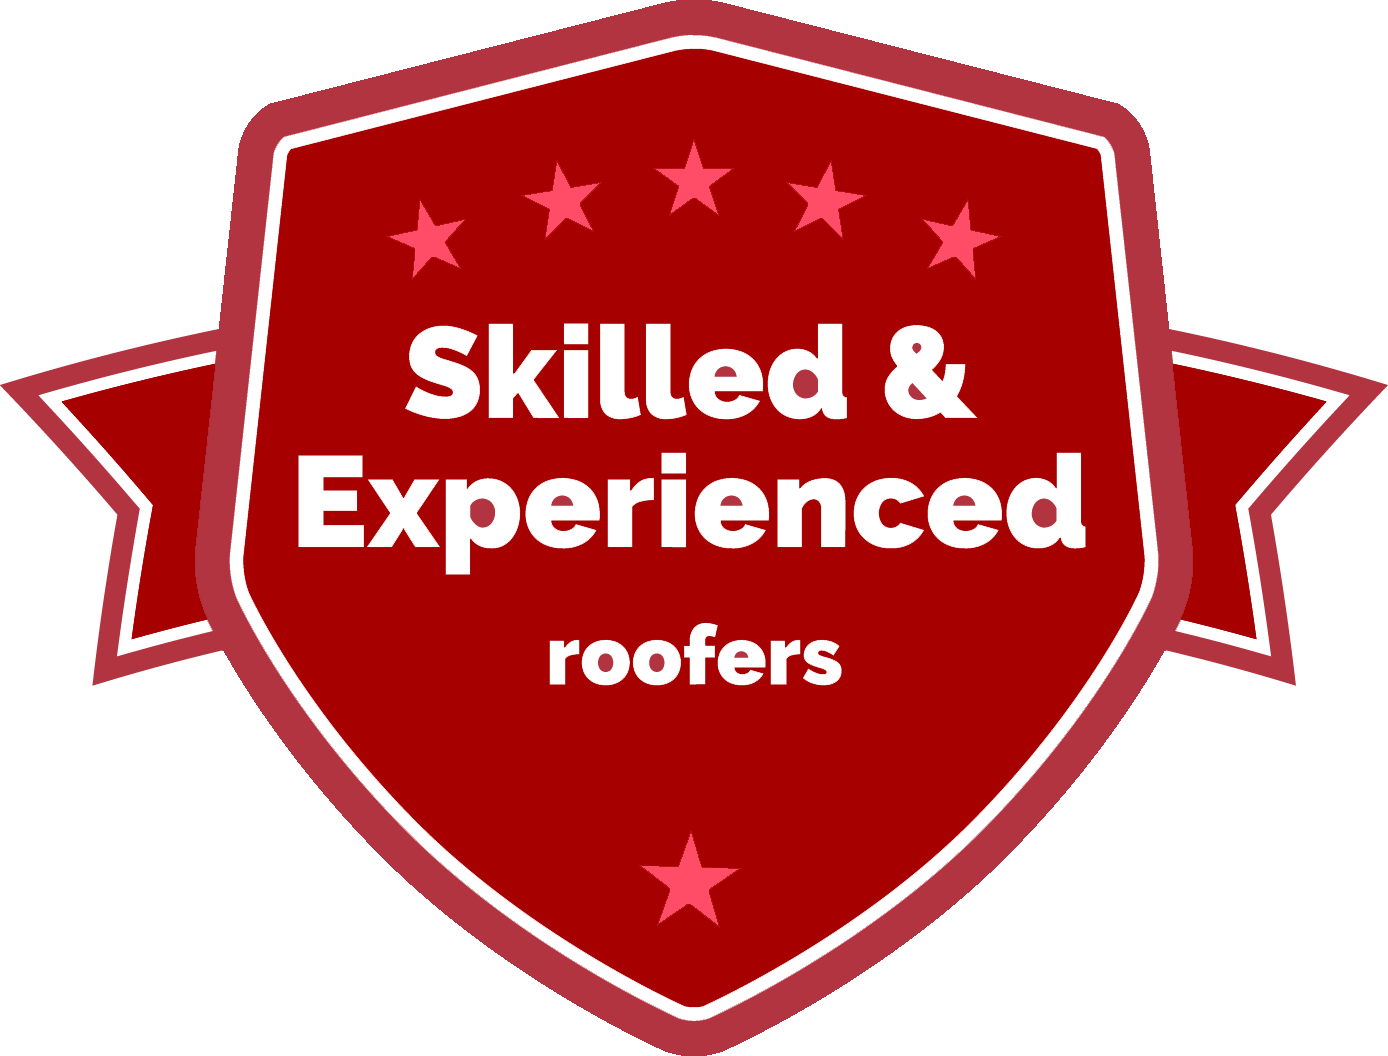 Experienced and skilled roofers